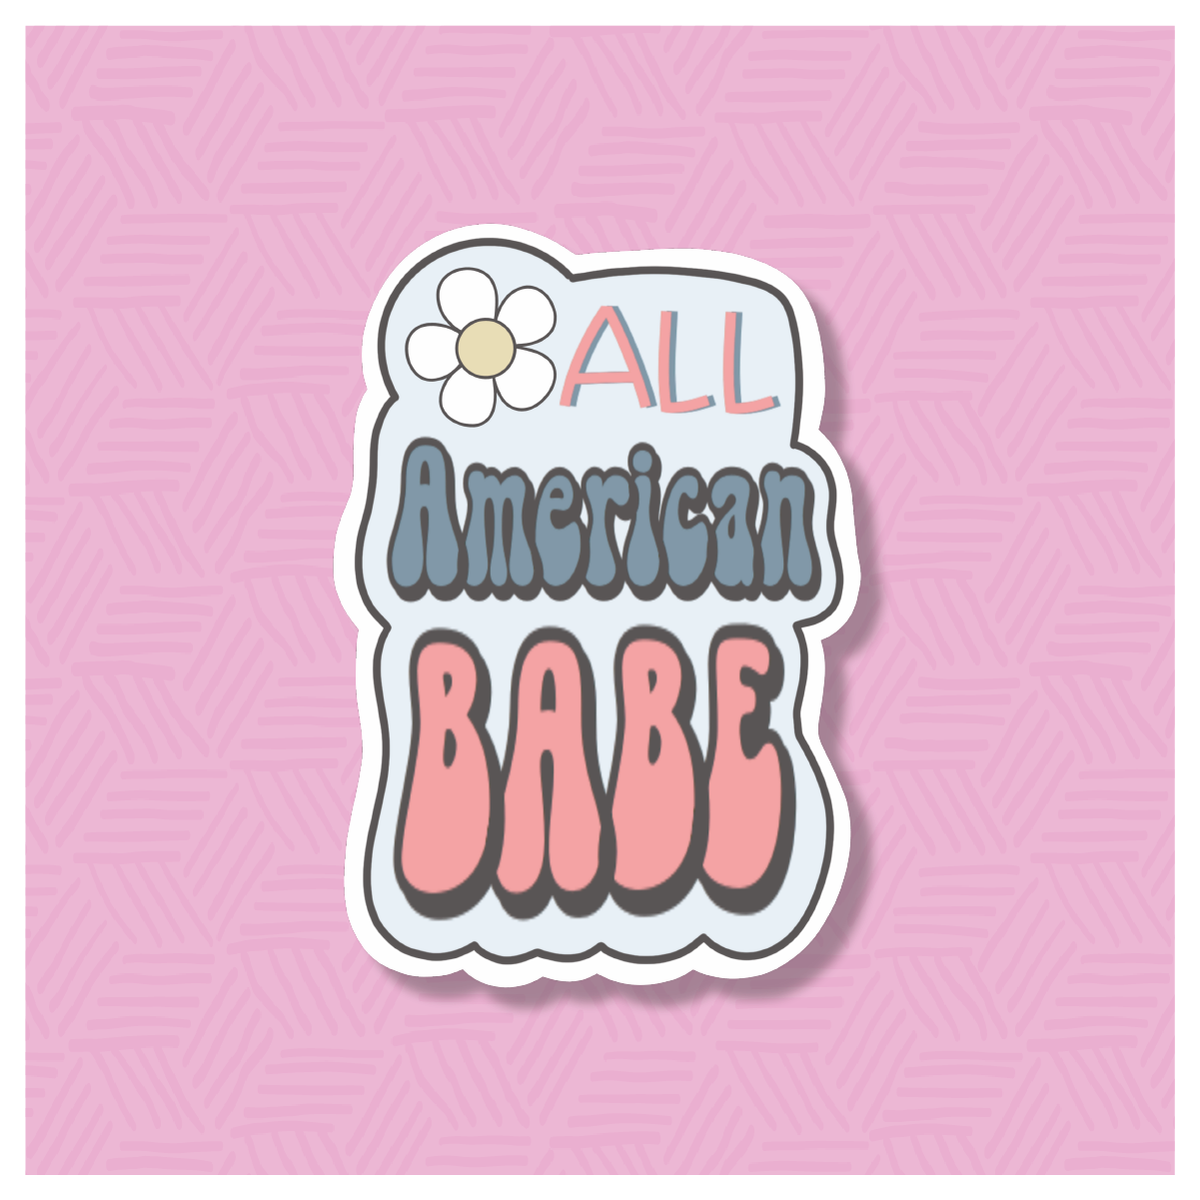 All American Babe Hand Lettered Digital Sticker File